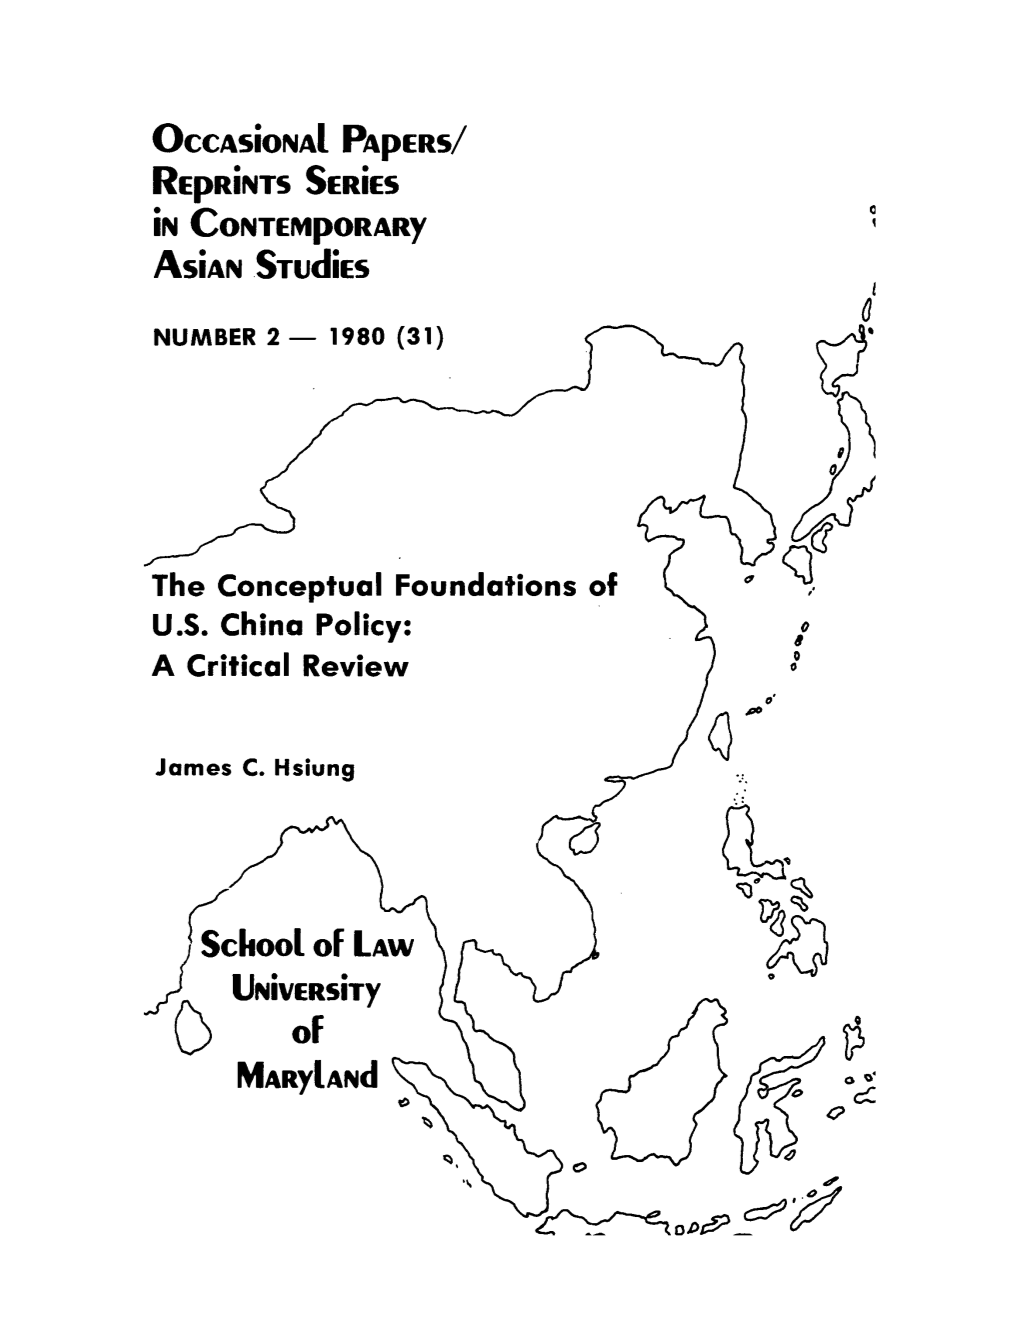 The Conceptual Foundations of US China Policy